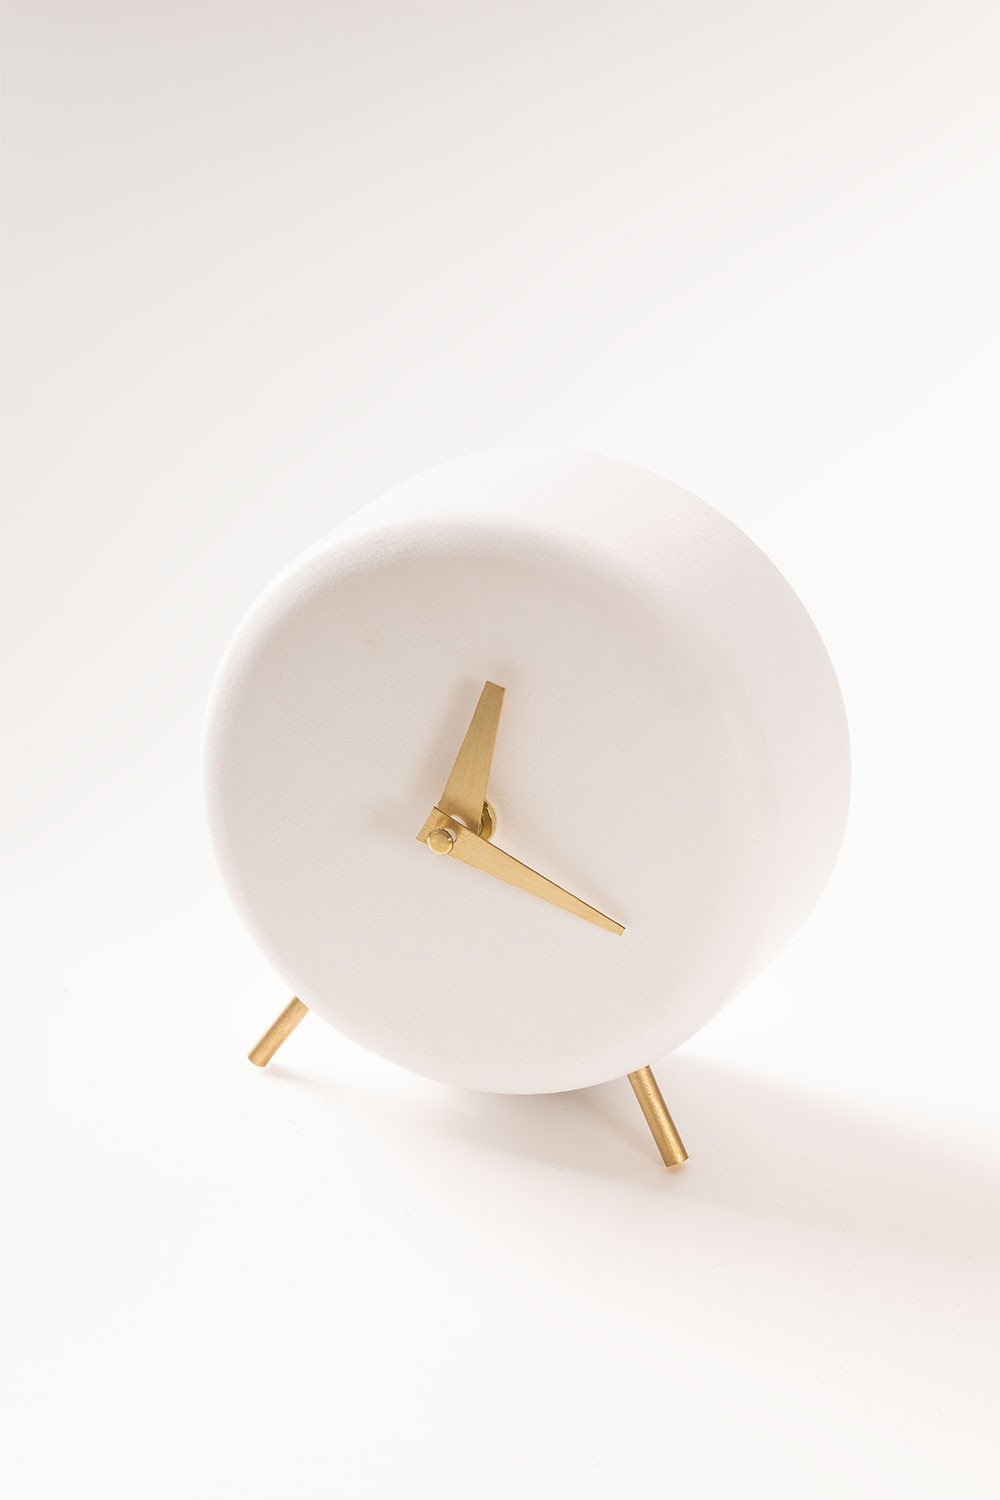 Cement Table Clock Clok, gallery image 1